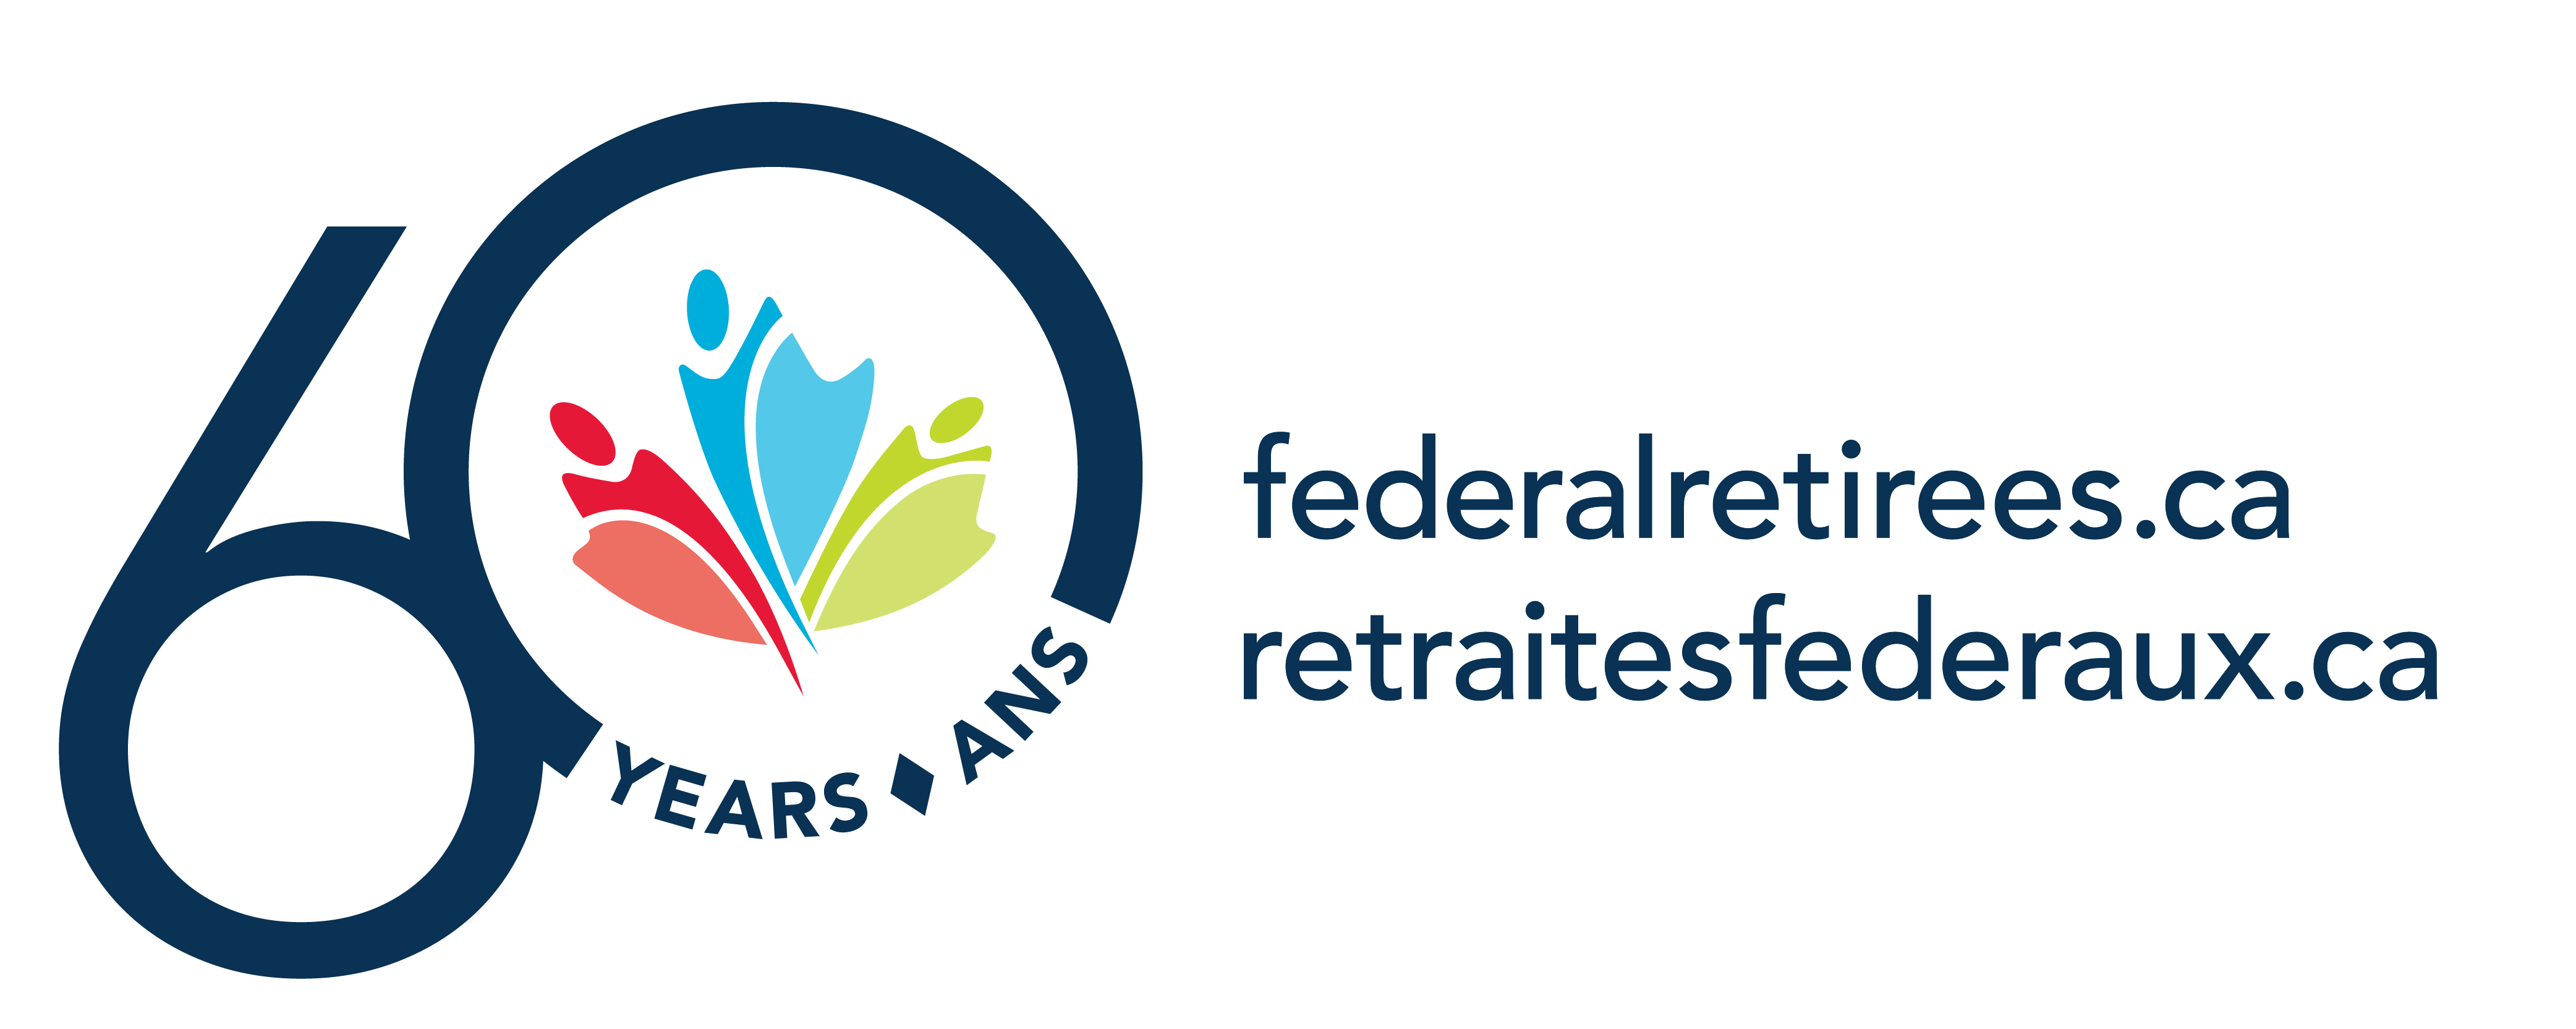 National Association of Federal Retirees logo - 60th anniversary edition